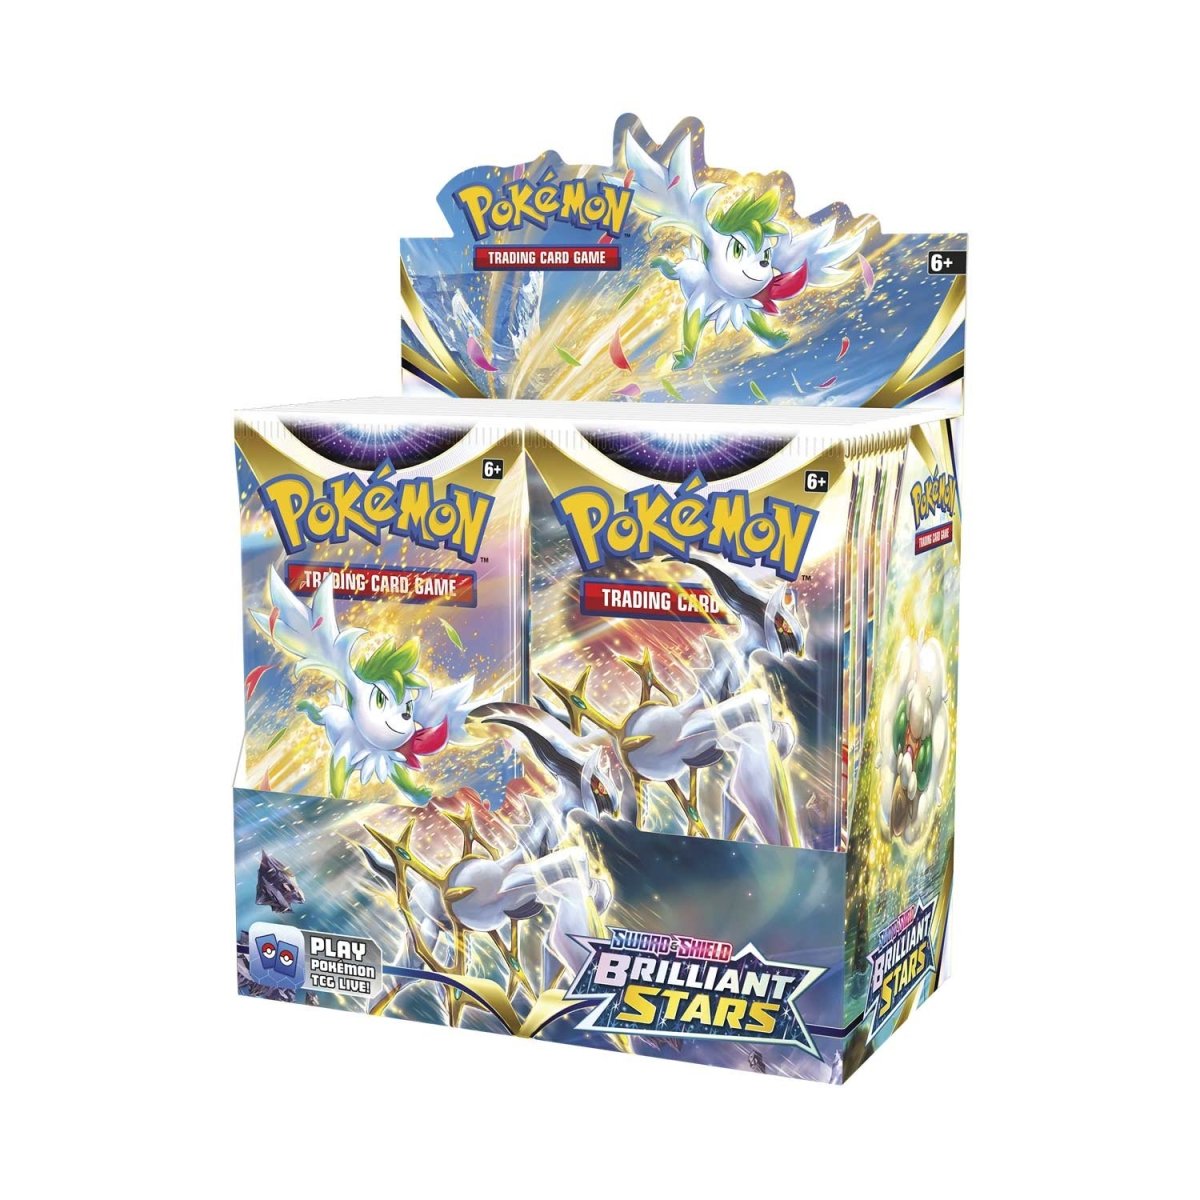 Where to buy a Pokemon Booster Box for cheap? – The Realistic Collector